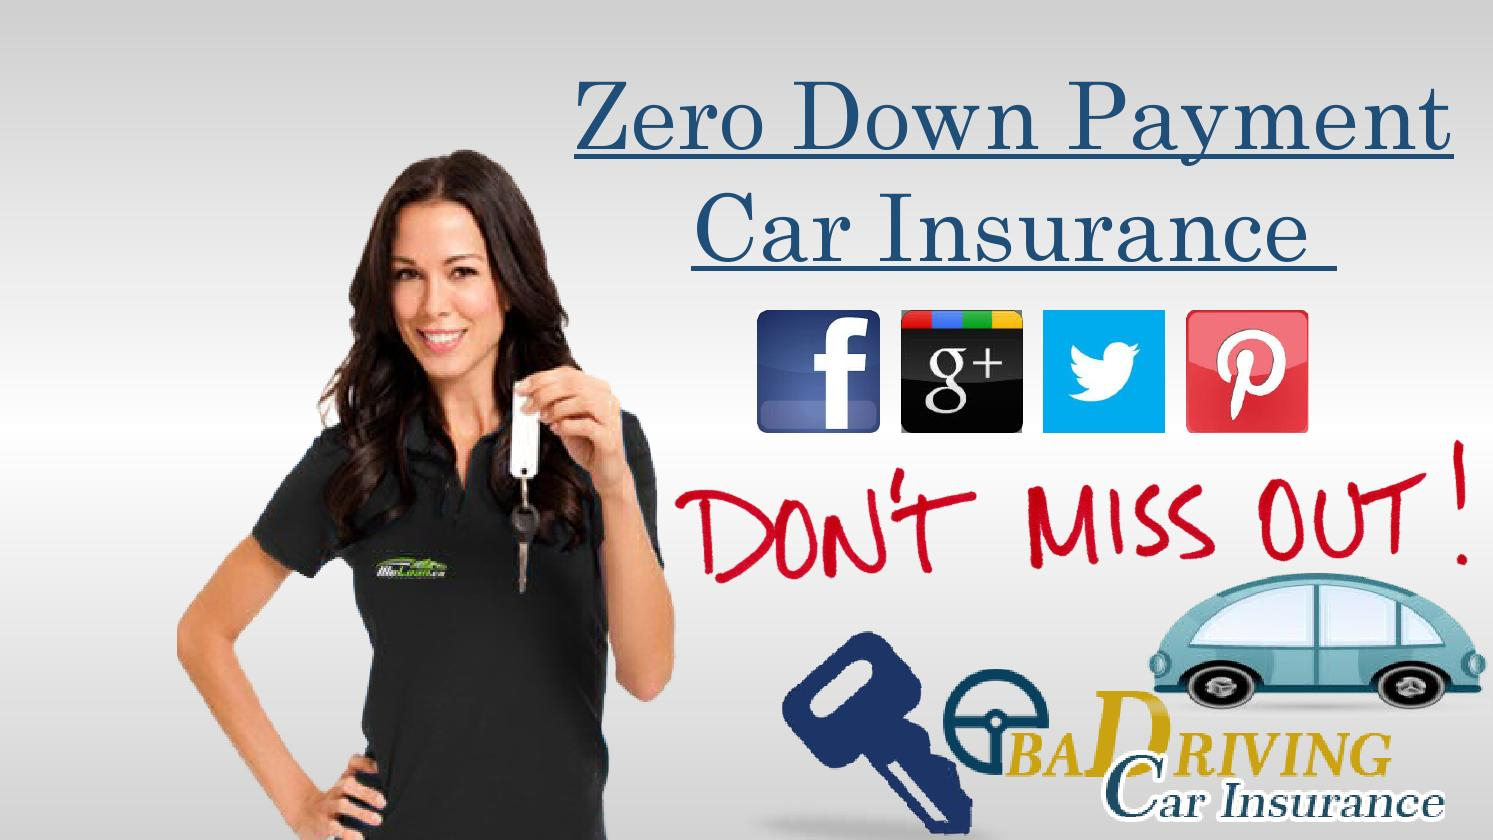 Get Car Insurance With Zero Down Payment Lowest Rates On within dimensions 1493 X 840